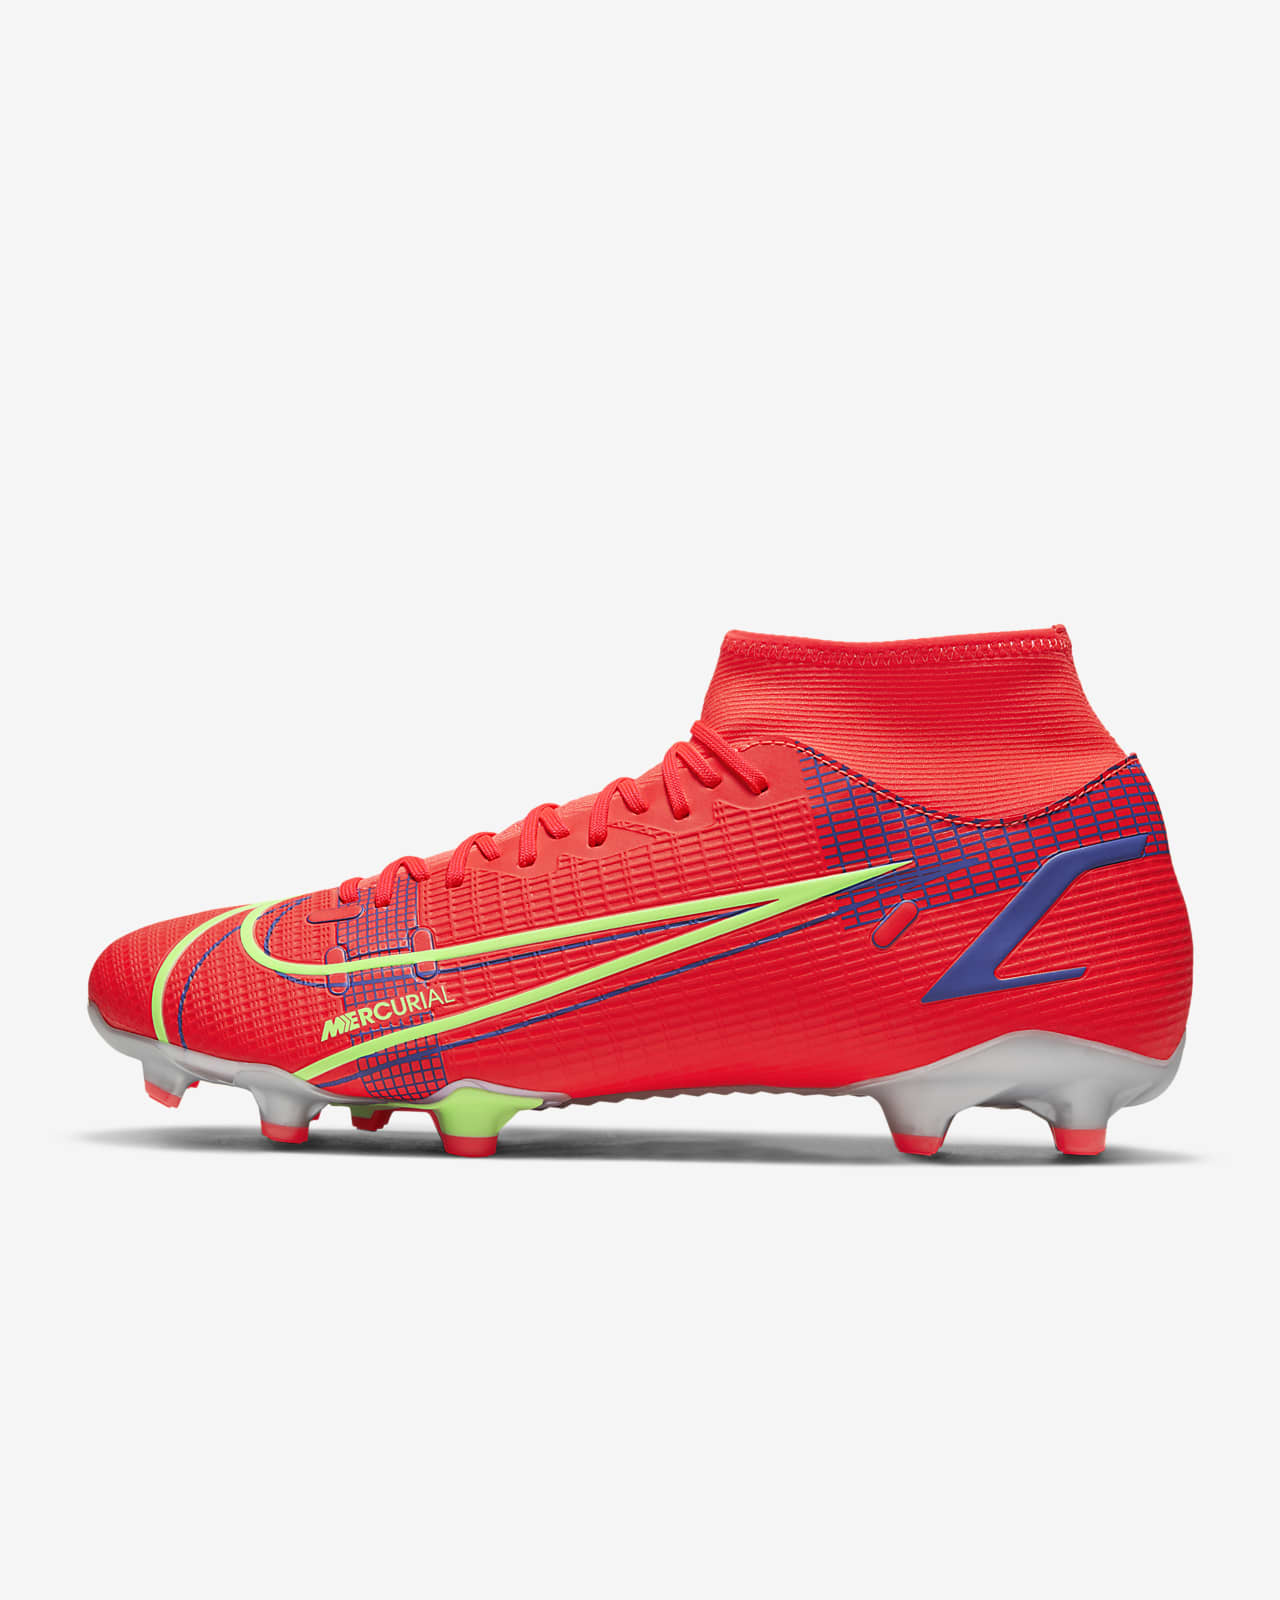 bright nike soccer cleats